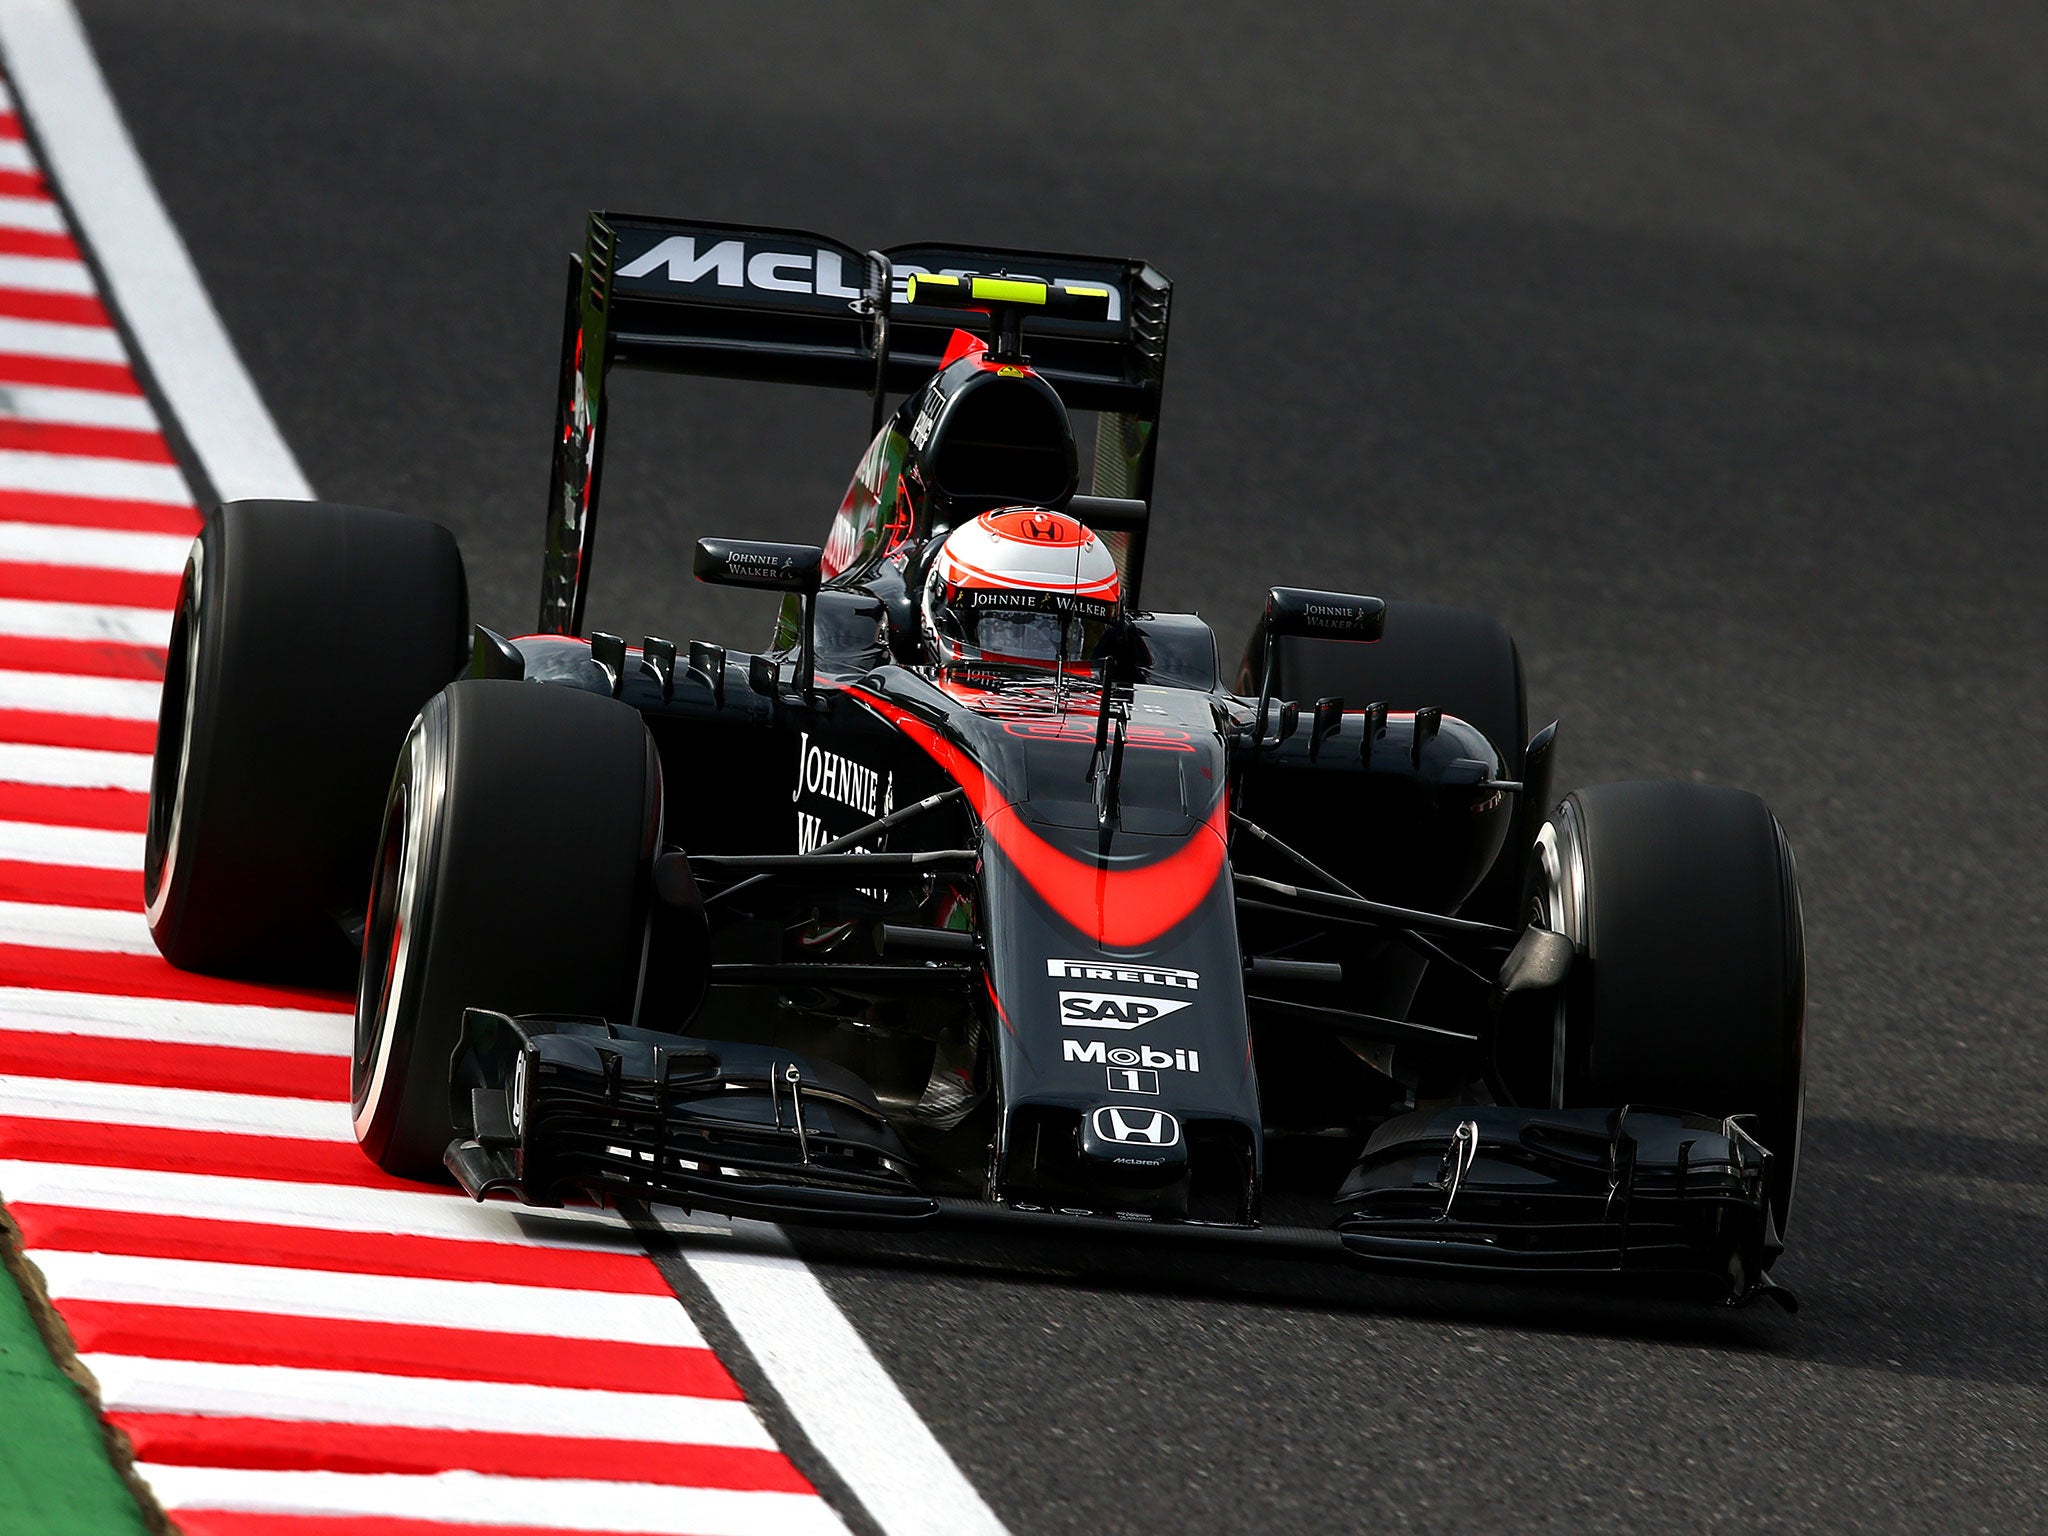 &#13;
Jenson Button endured another frustrating weekend&#13;